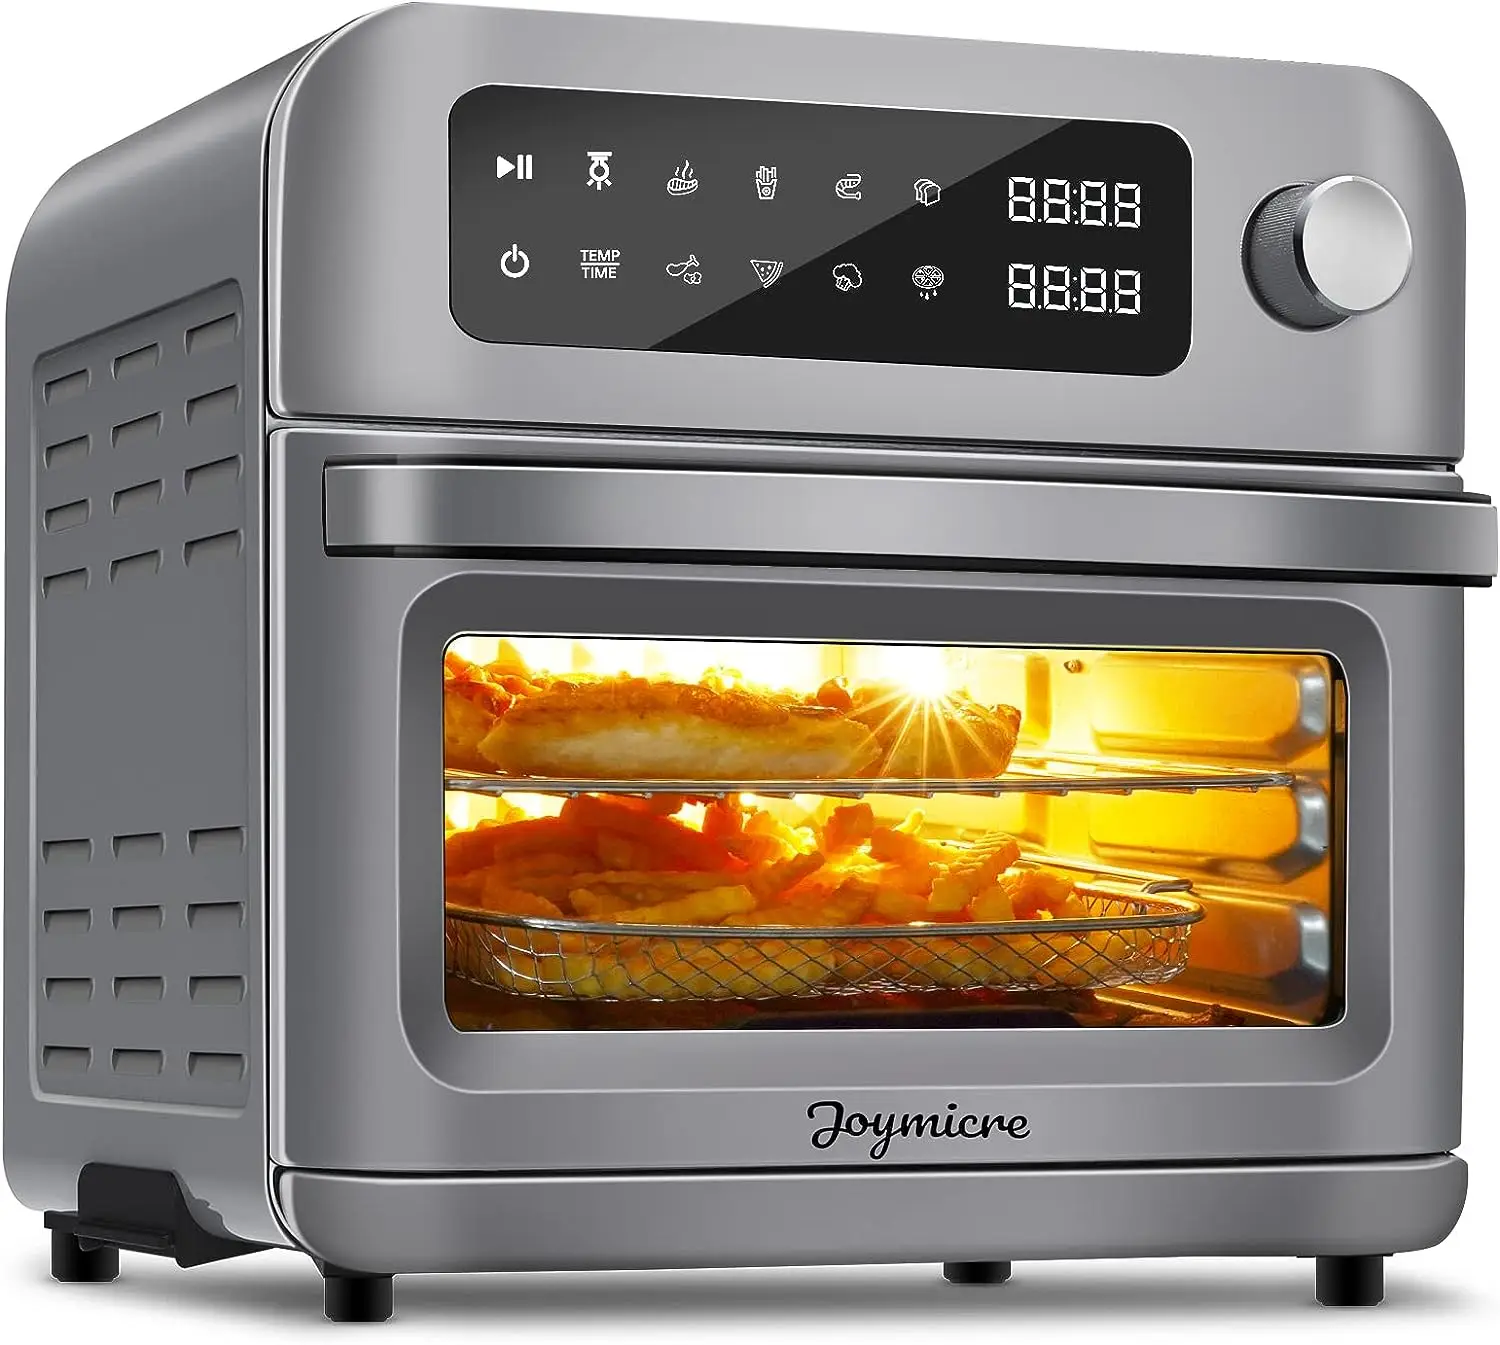 Toaster Oven, 1700w High Power Airfryer Dehydrator Combo With Touchscreen Convection Countertop Oven, Dishwasher Safe